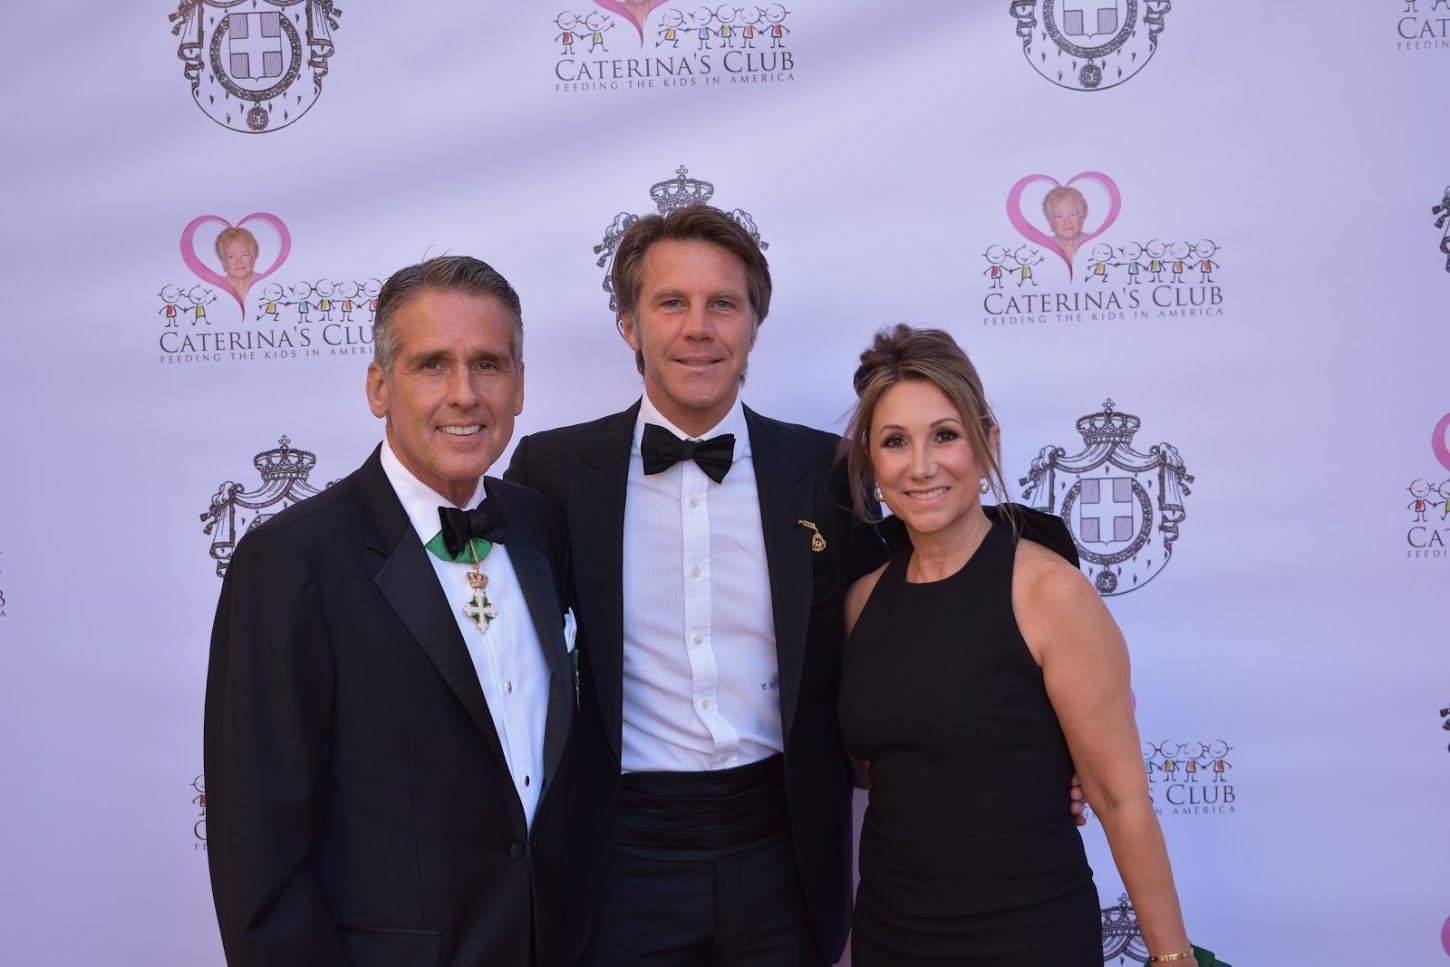 Event Chairs Daniel J. McClory and Mrs. Florentina McClory with HRH Prince Emanuele Filiberto of Savoy